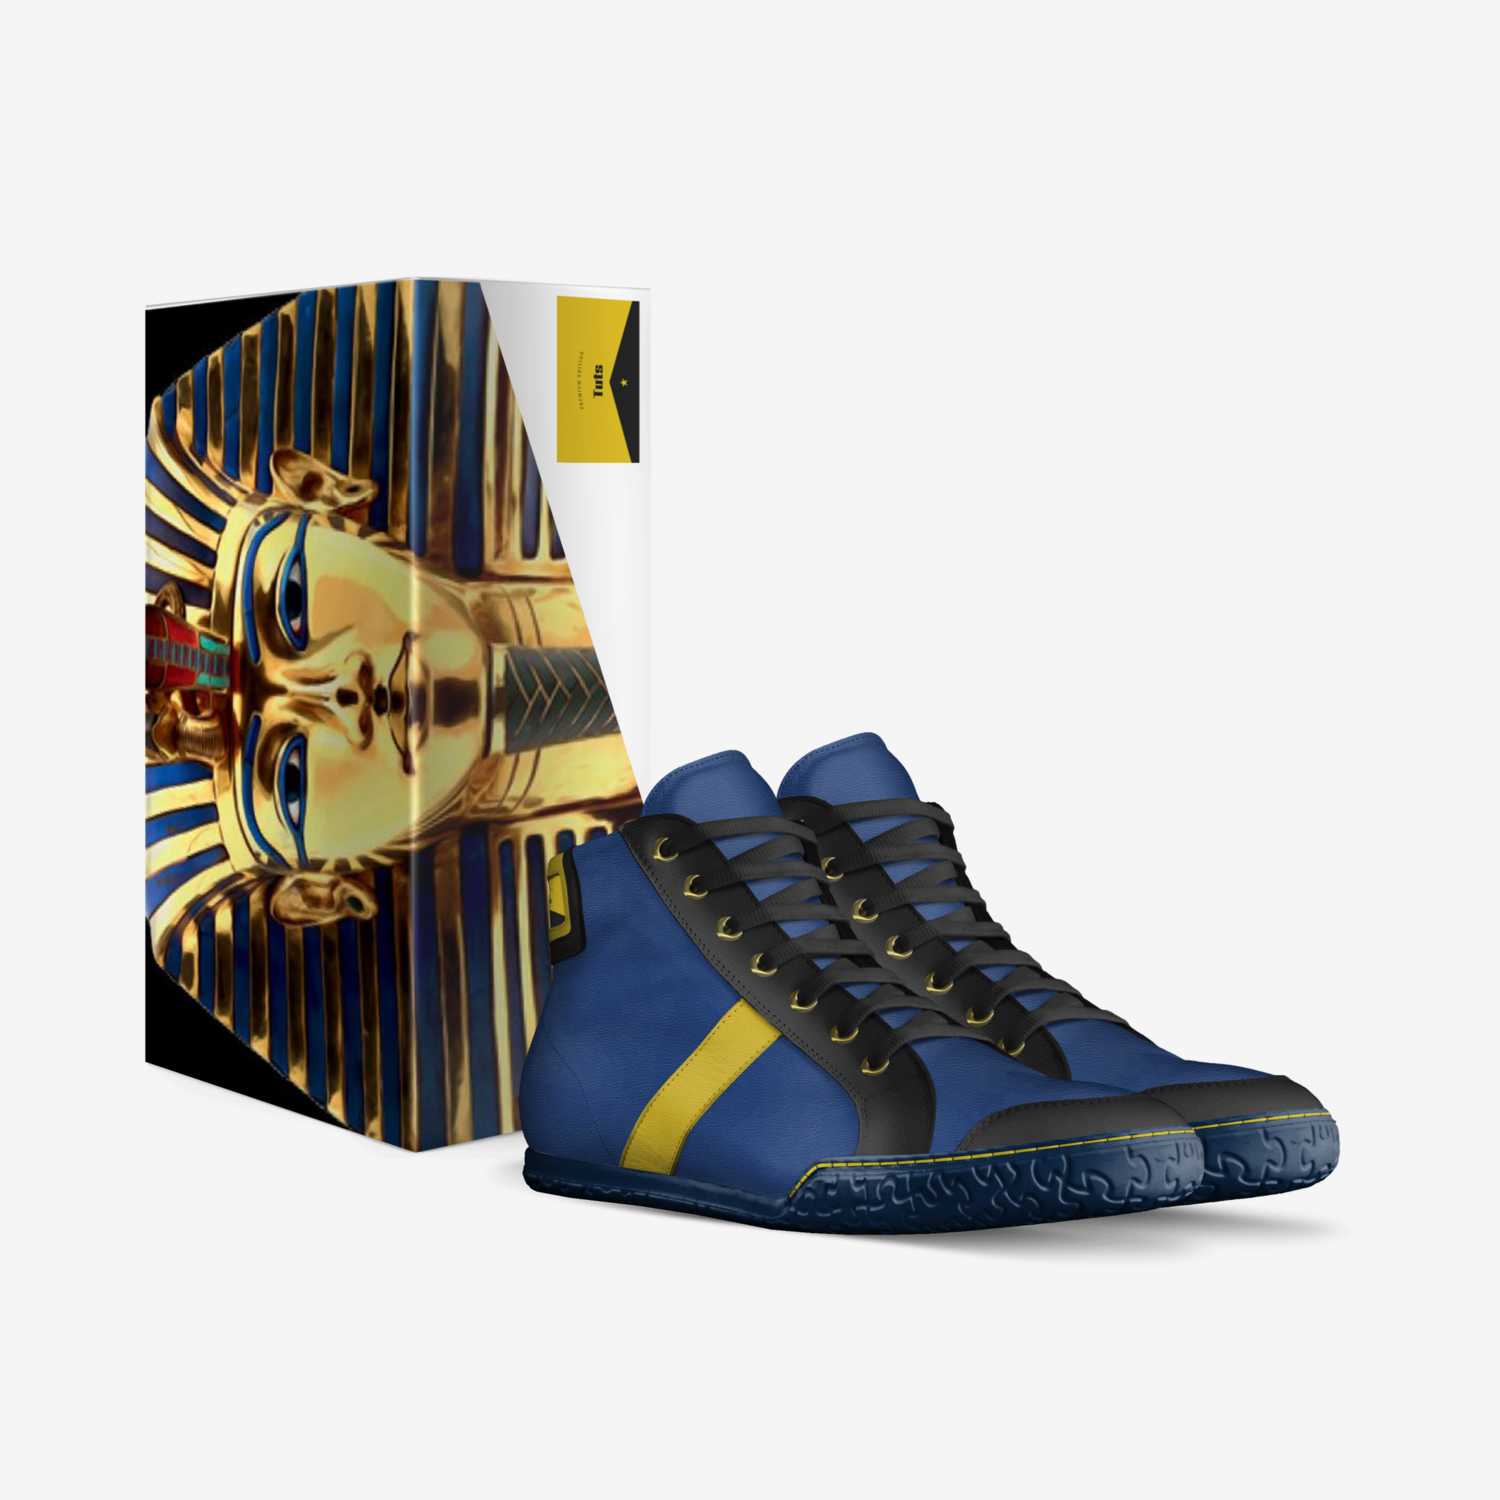 Tuts custom made in Italy shoes by Jon Guest | Box view